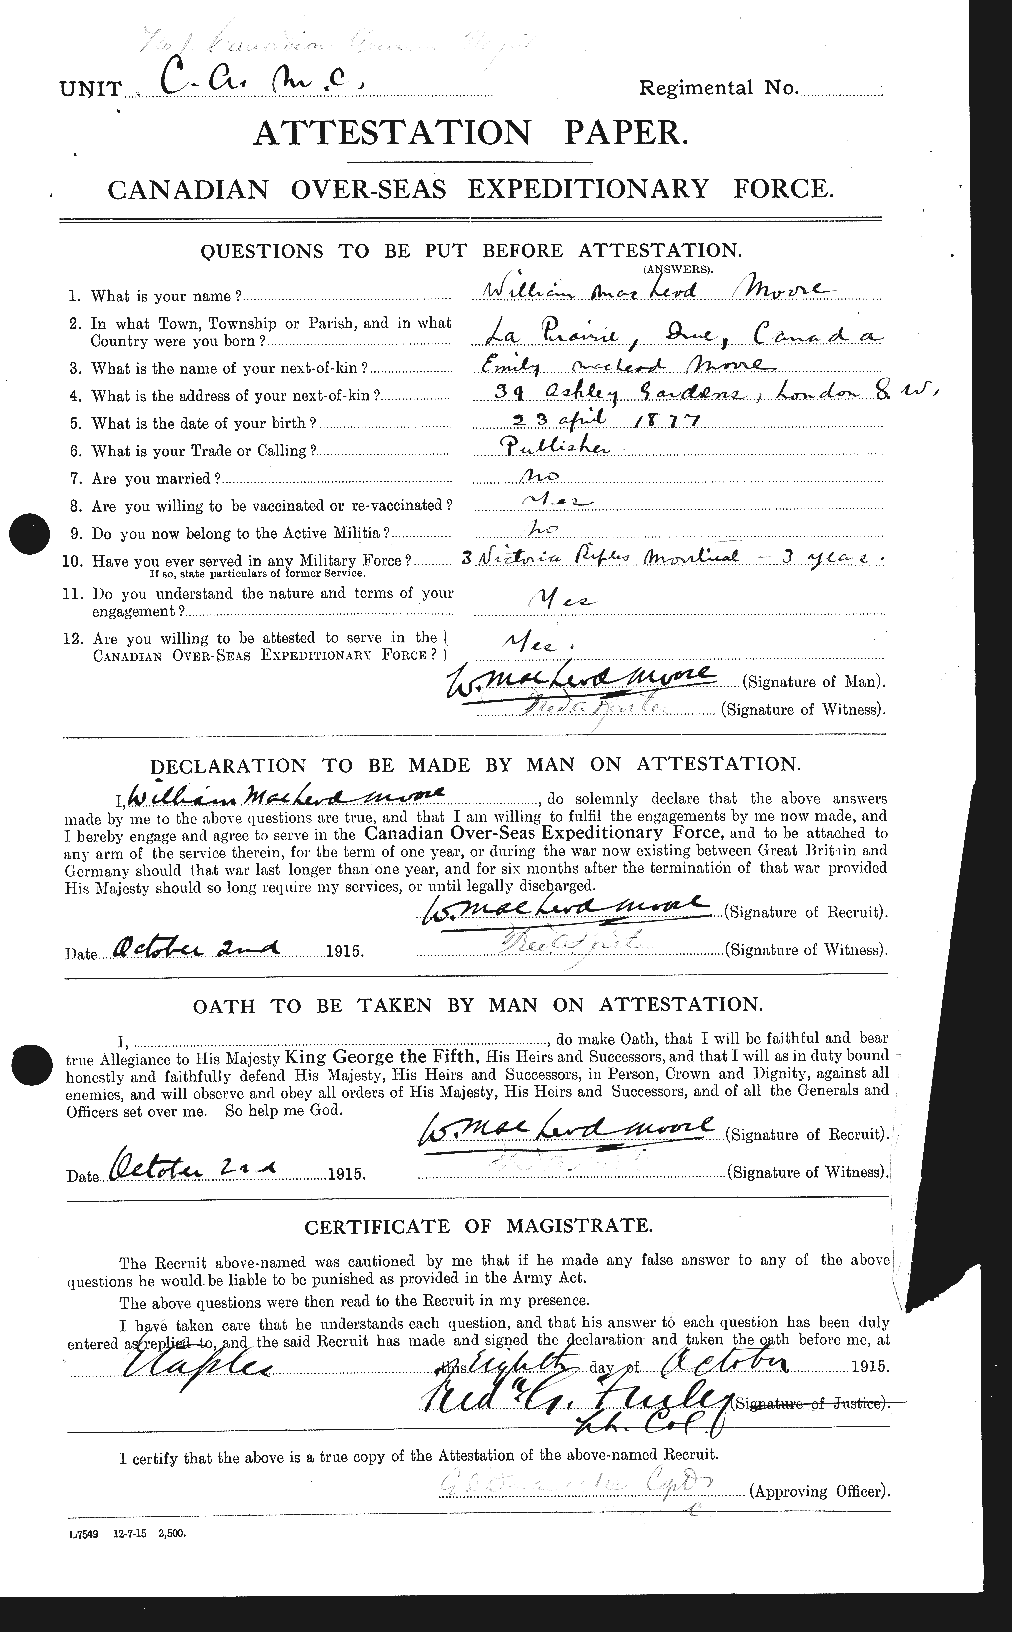 Personnel Records of the First World War - CEF 505856a